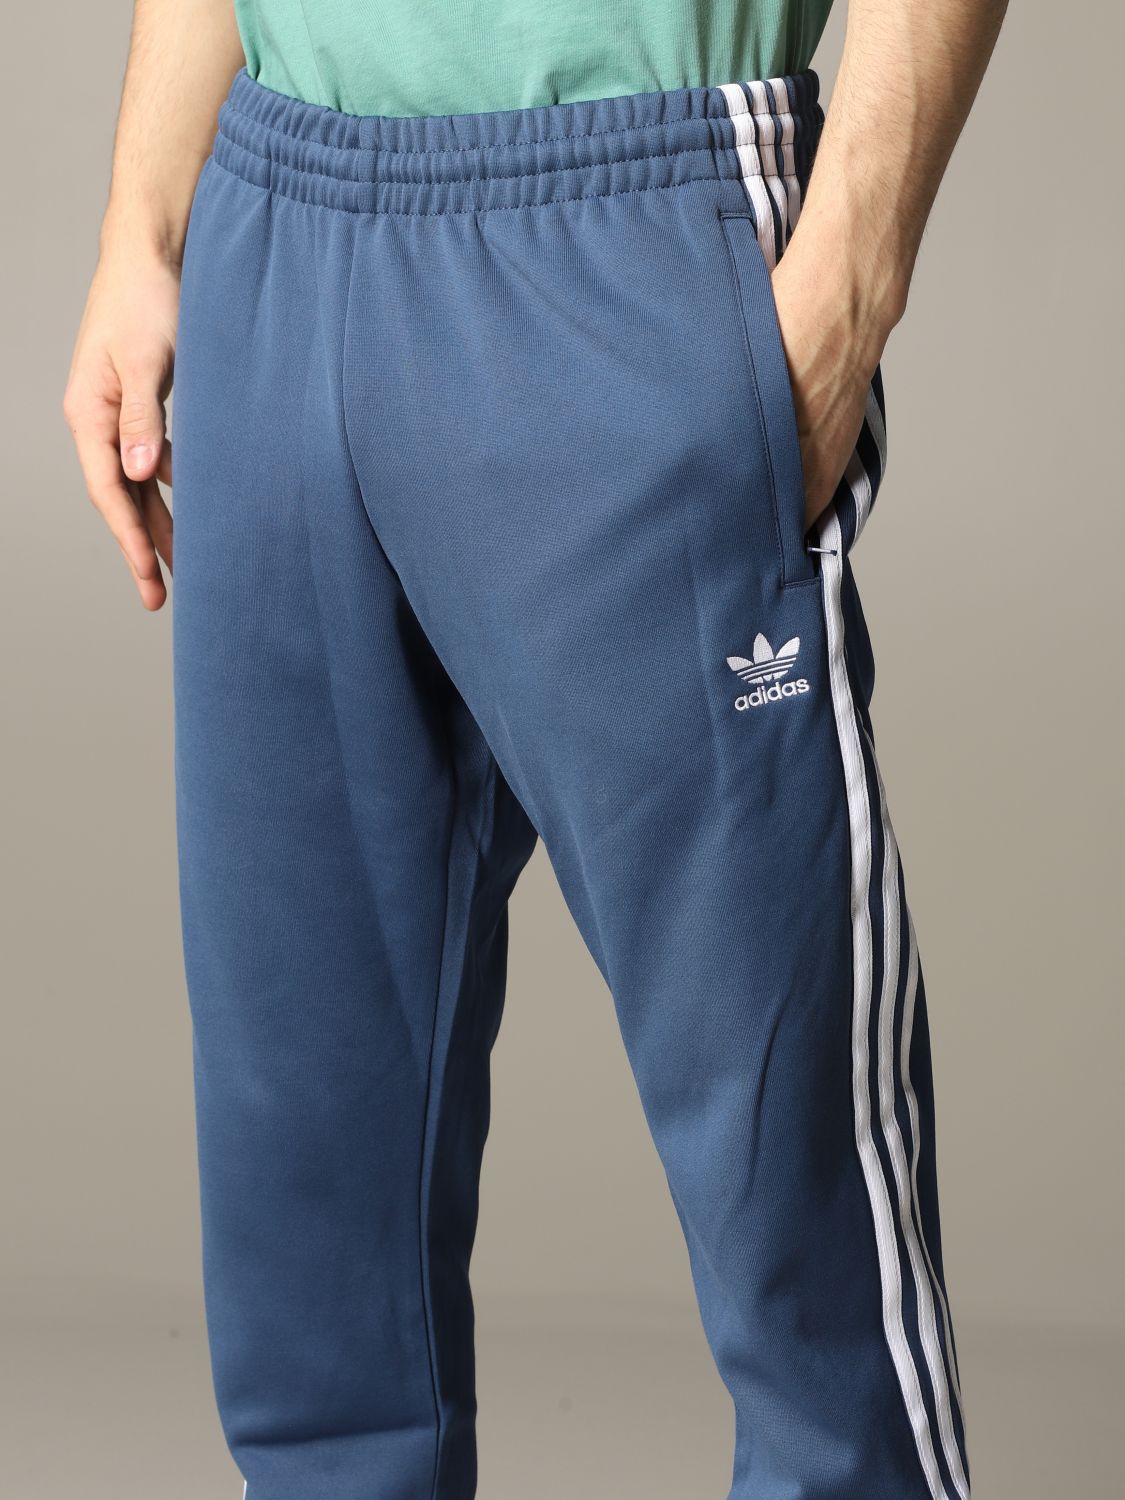 adidas jogging trousers